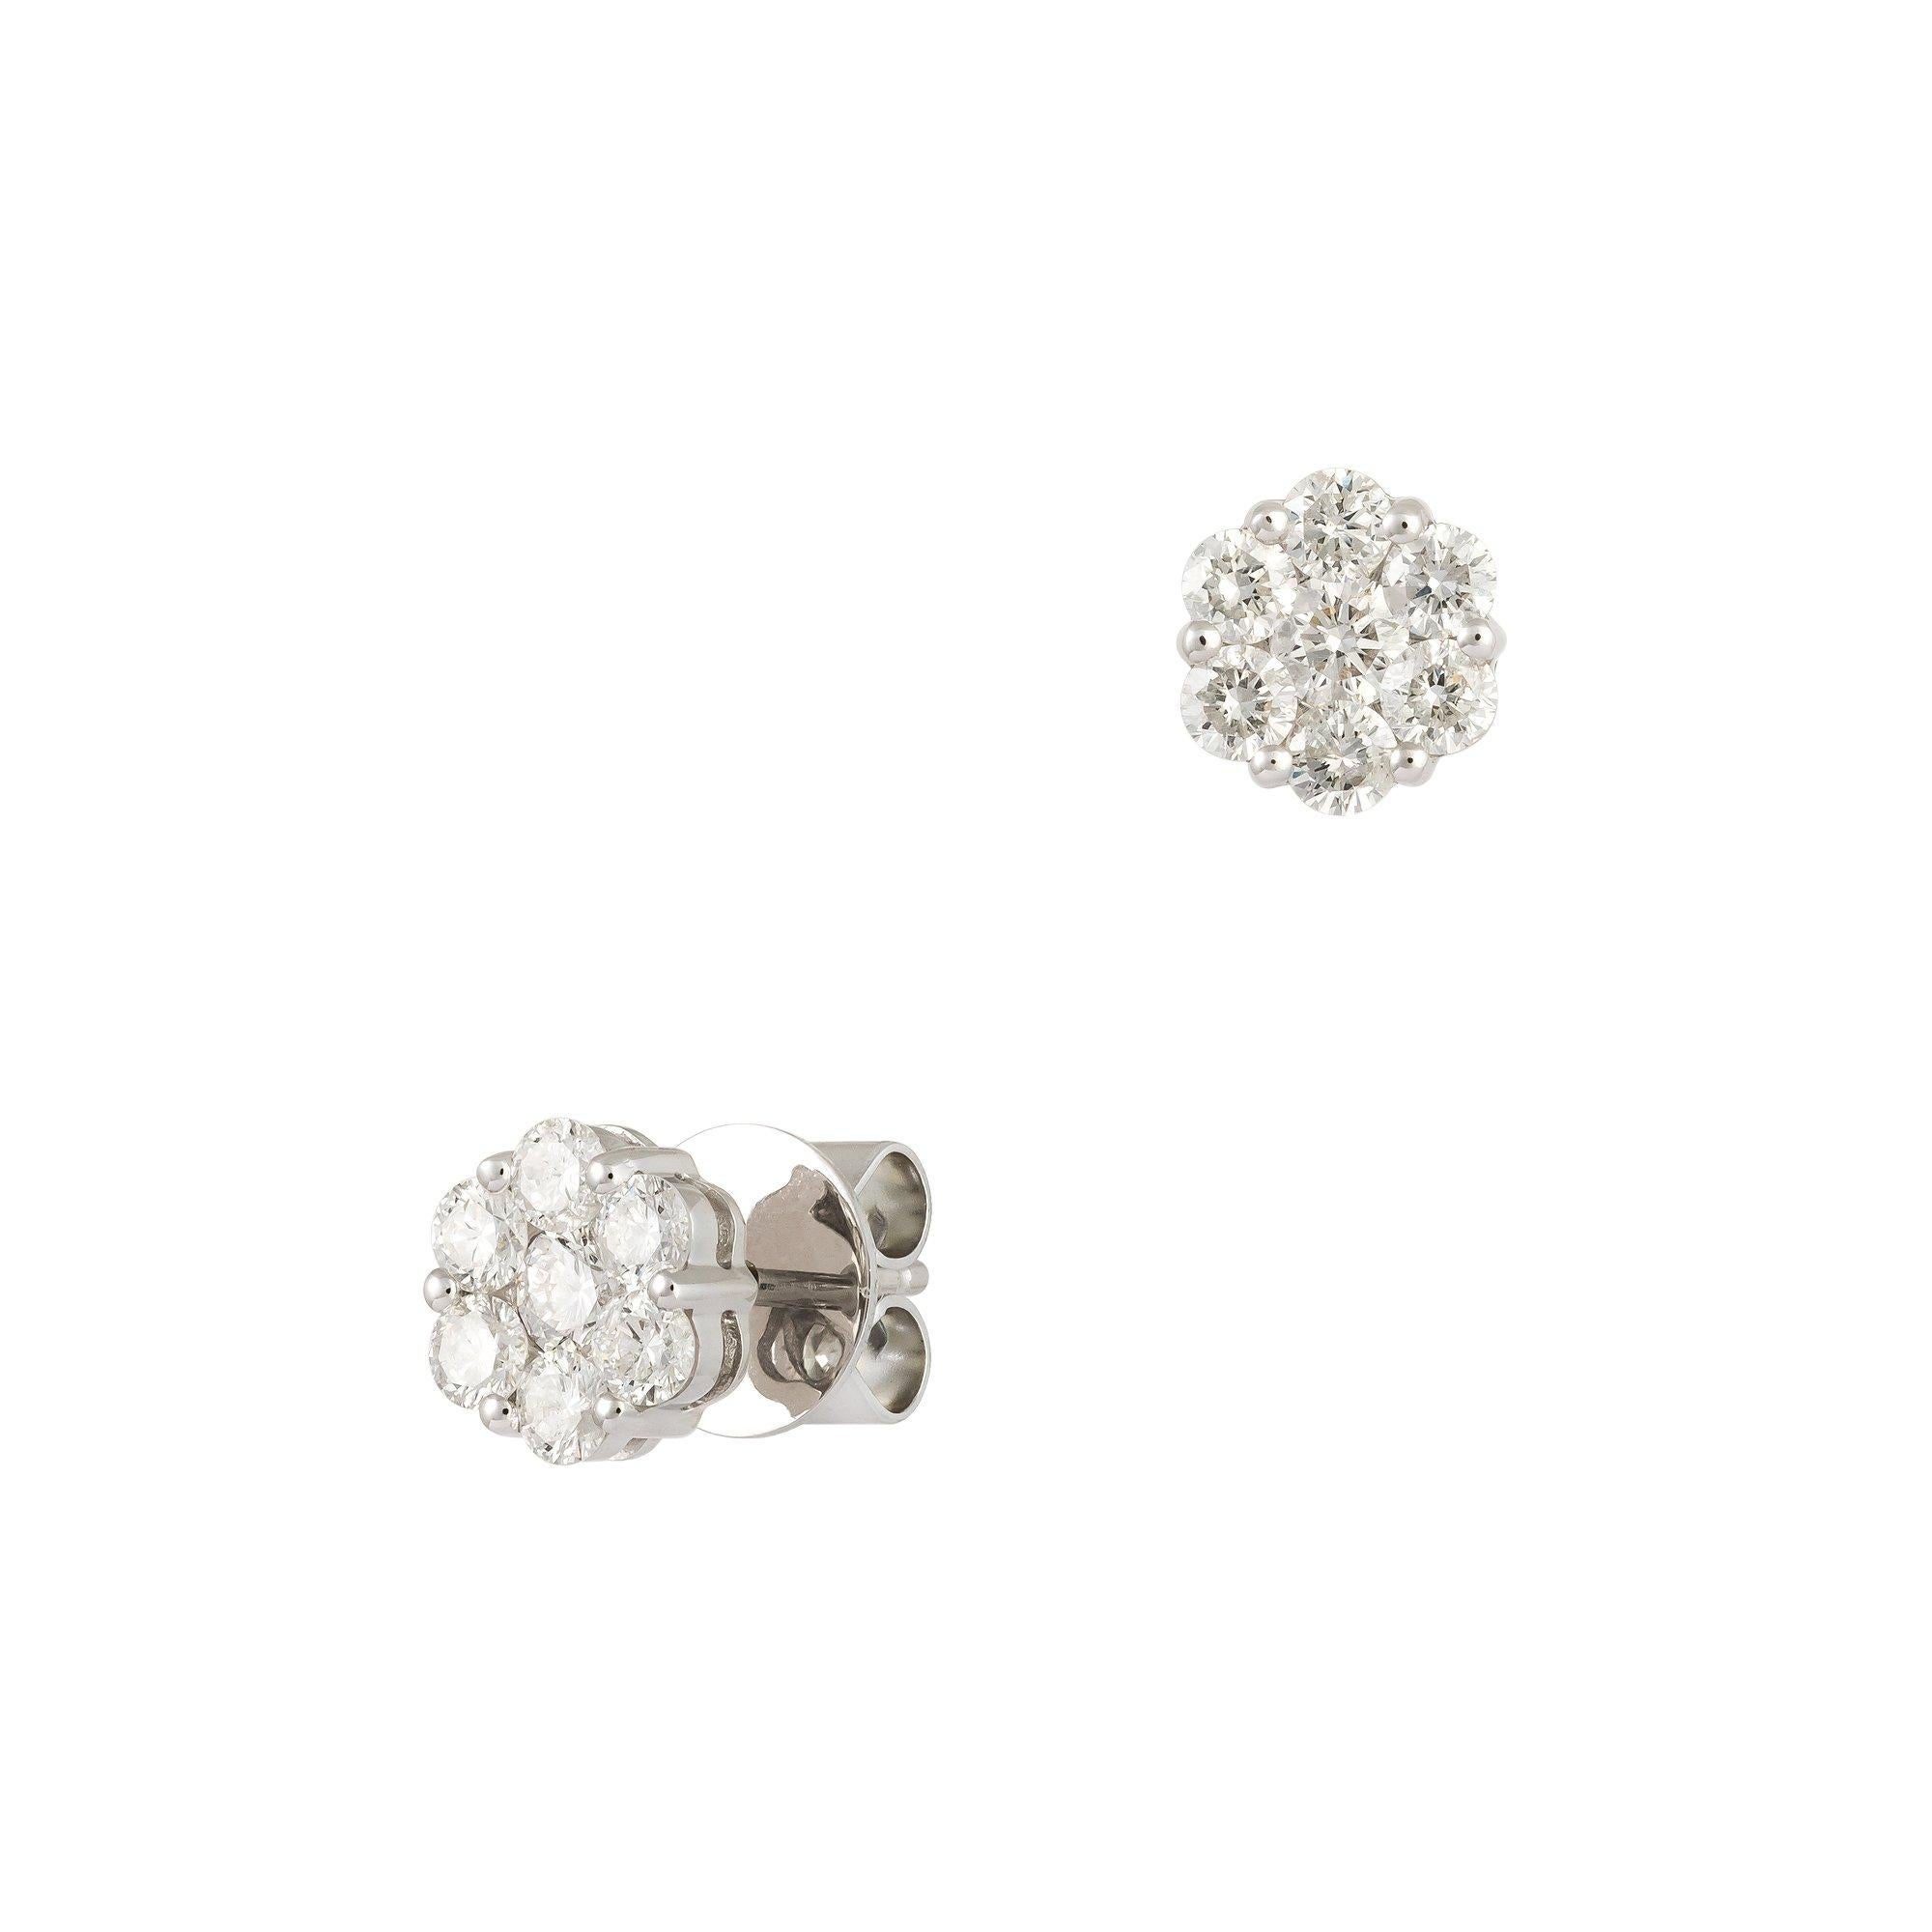 Classic Diamond Stud EARRING 18K White Gold Diamond

With a heritage of ancient fine Swiss jewelry traditions, NATKINA is a Geneva based jewellery brand, which creates modern jewellery masterpieces suitable for every day life.
It is our honour to